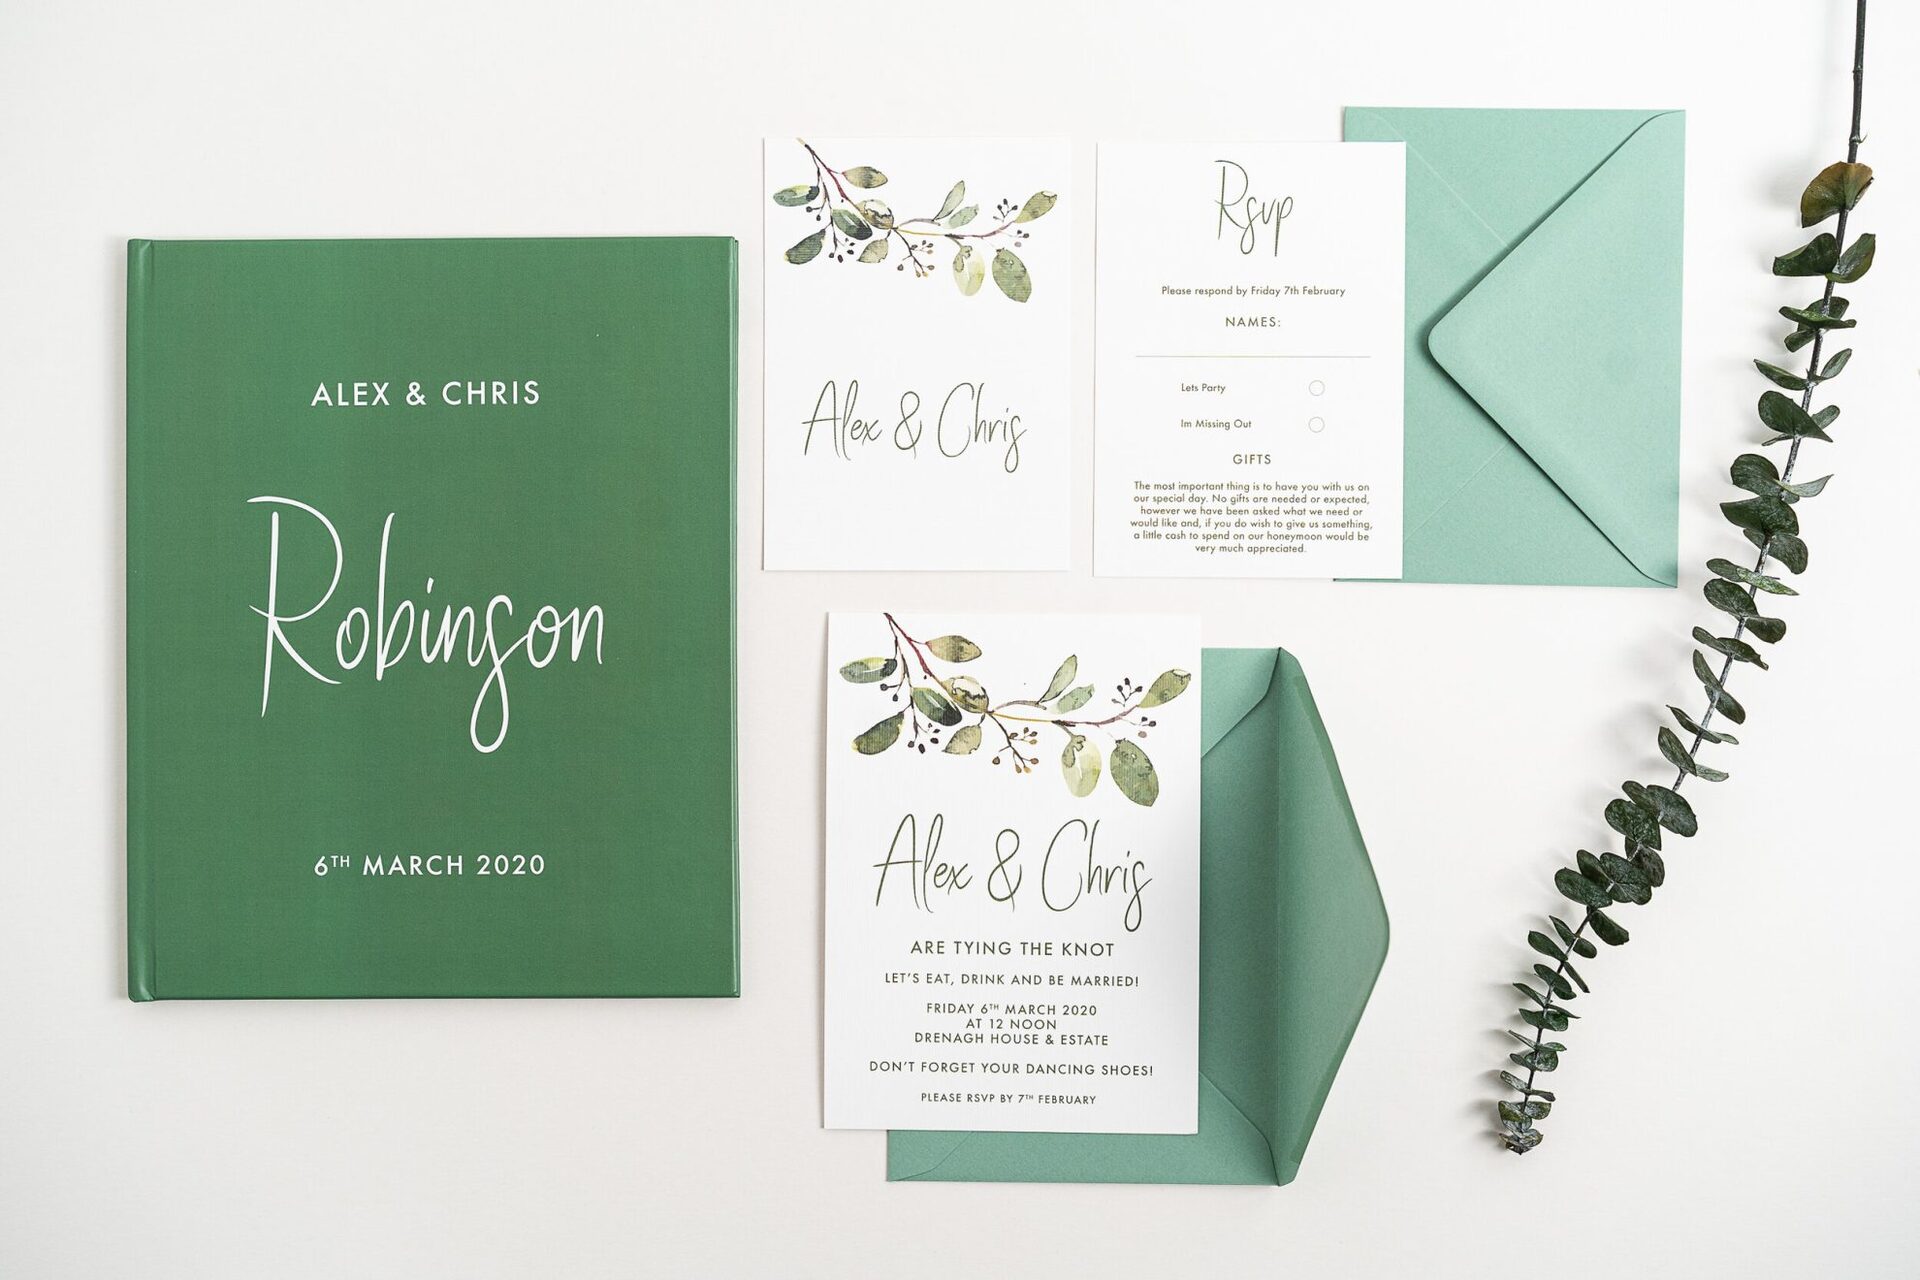 Bespoke wedding invitations from letter and Lime Design